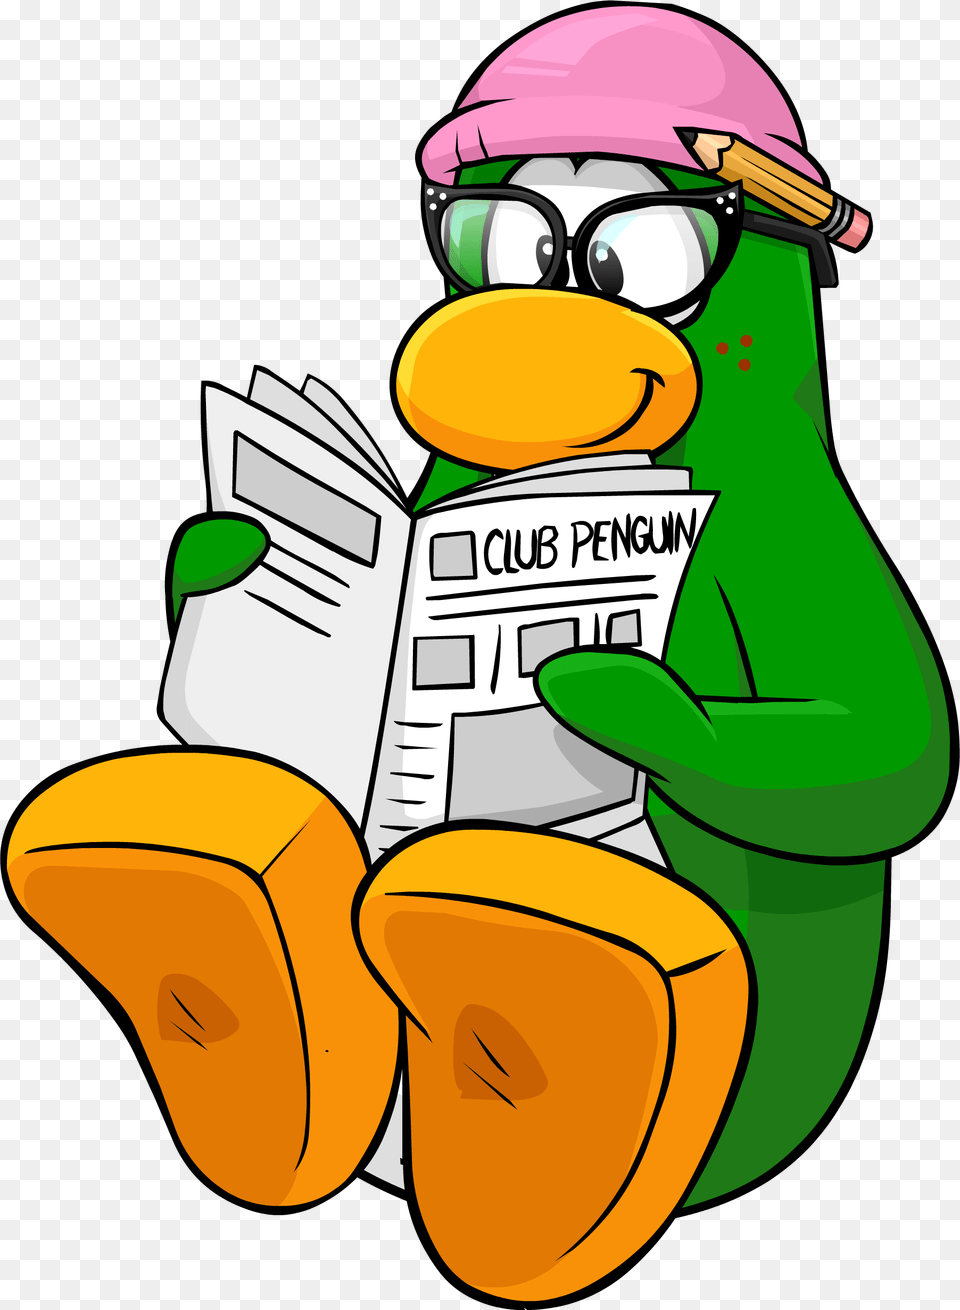 Club Penguin Rewritten Wiki Club Penguin Reading Newspaper, Food, Fruit, Plant, Produce Free Transparent Png